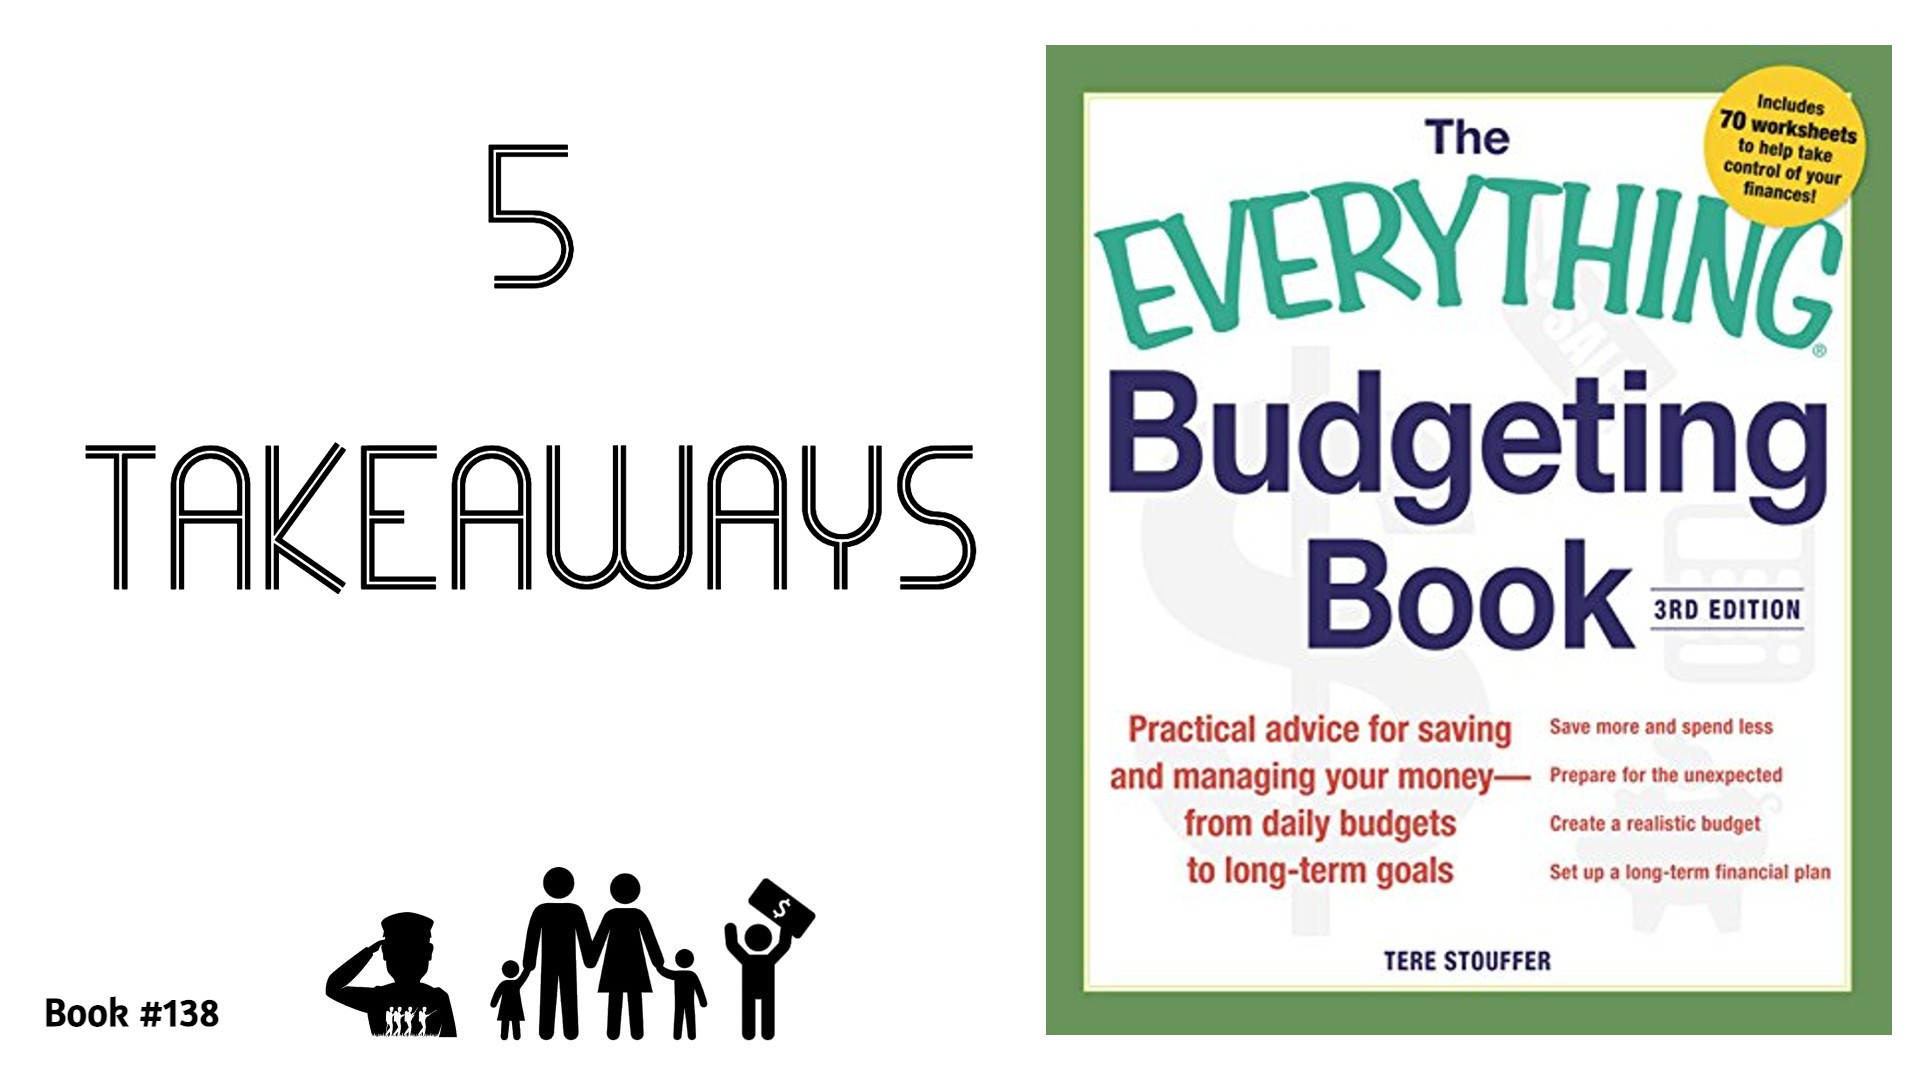 5 Takeaways from “The Everything Budgeting Book”